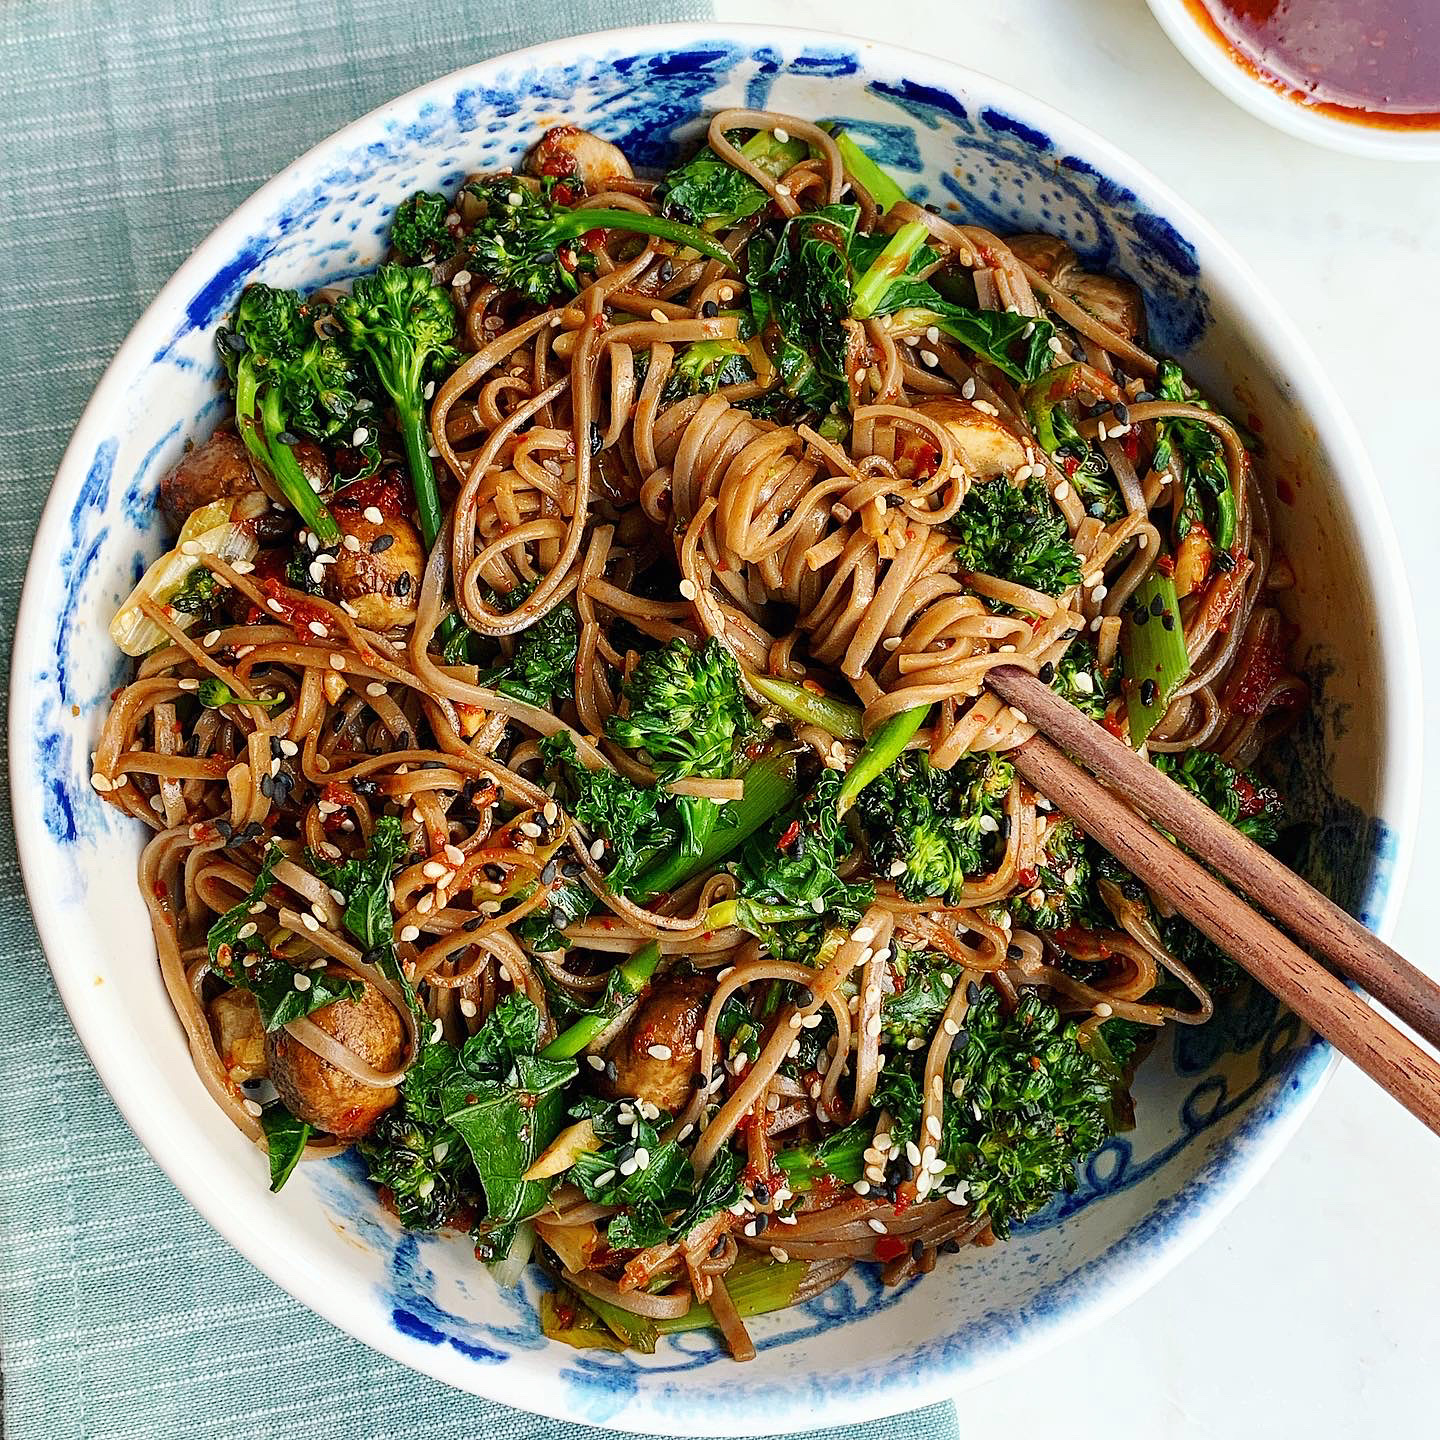 Spicy Asian Noodles